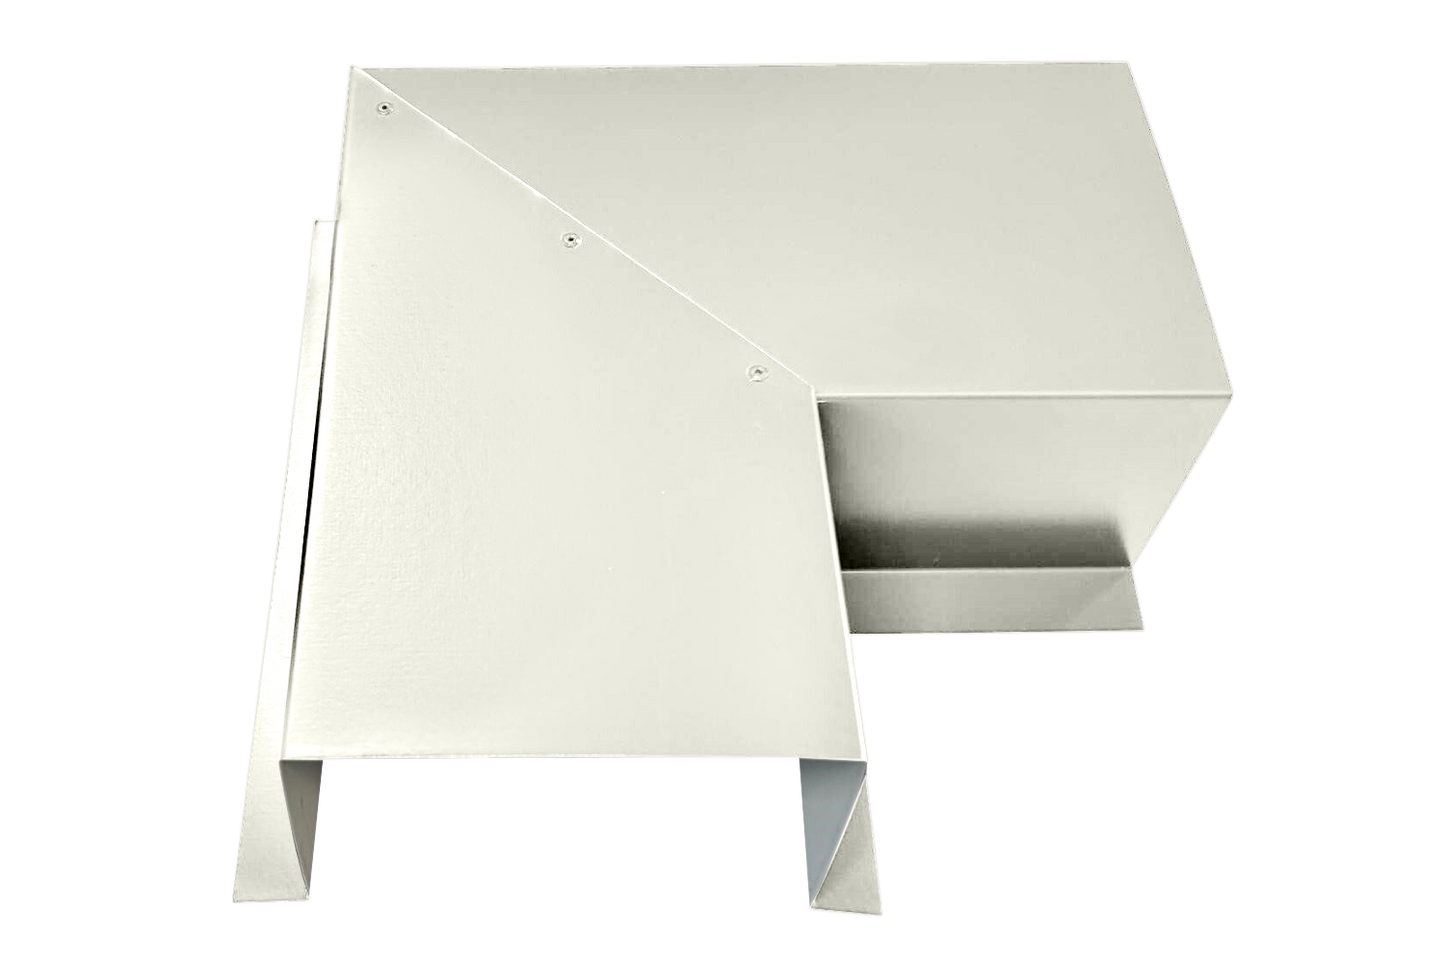 A white, angular metal duct elbow is shown on a neutral background. Crafted from premium quality 24 gauge steel, the Perma Cover Commercial Series - 24 Gauge Line Set Cover Side Turning Elbows - Premium Quality boasts a complex design with multiple sections and bends, featuring sharp edges and clean lines. It appears to be an HVAC component used for directing airflow, ensuring easy installation.